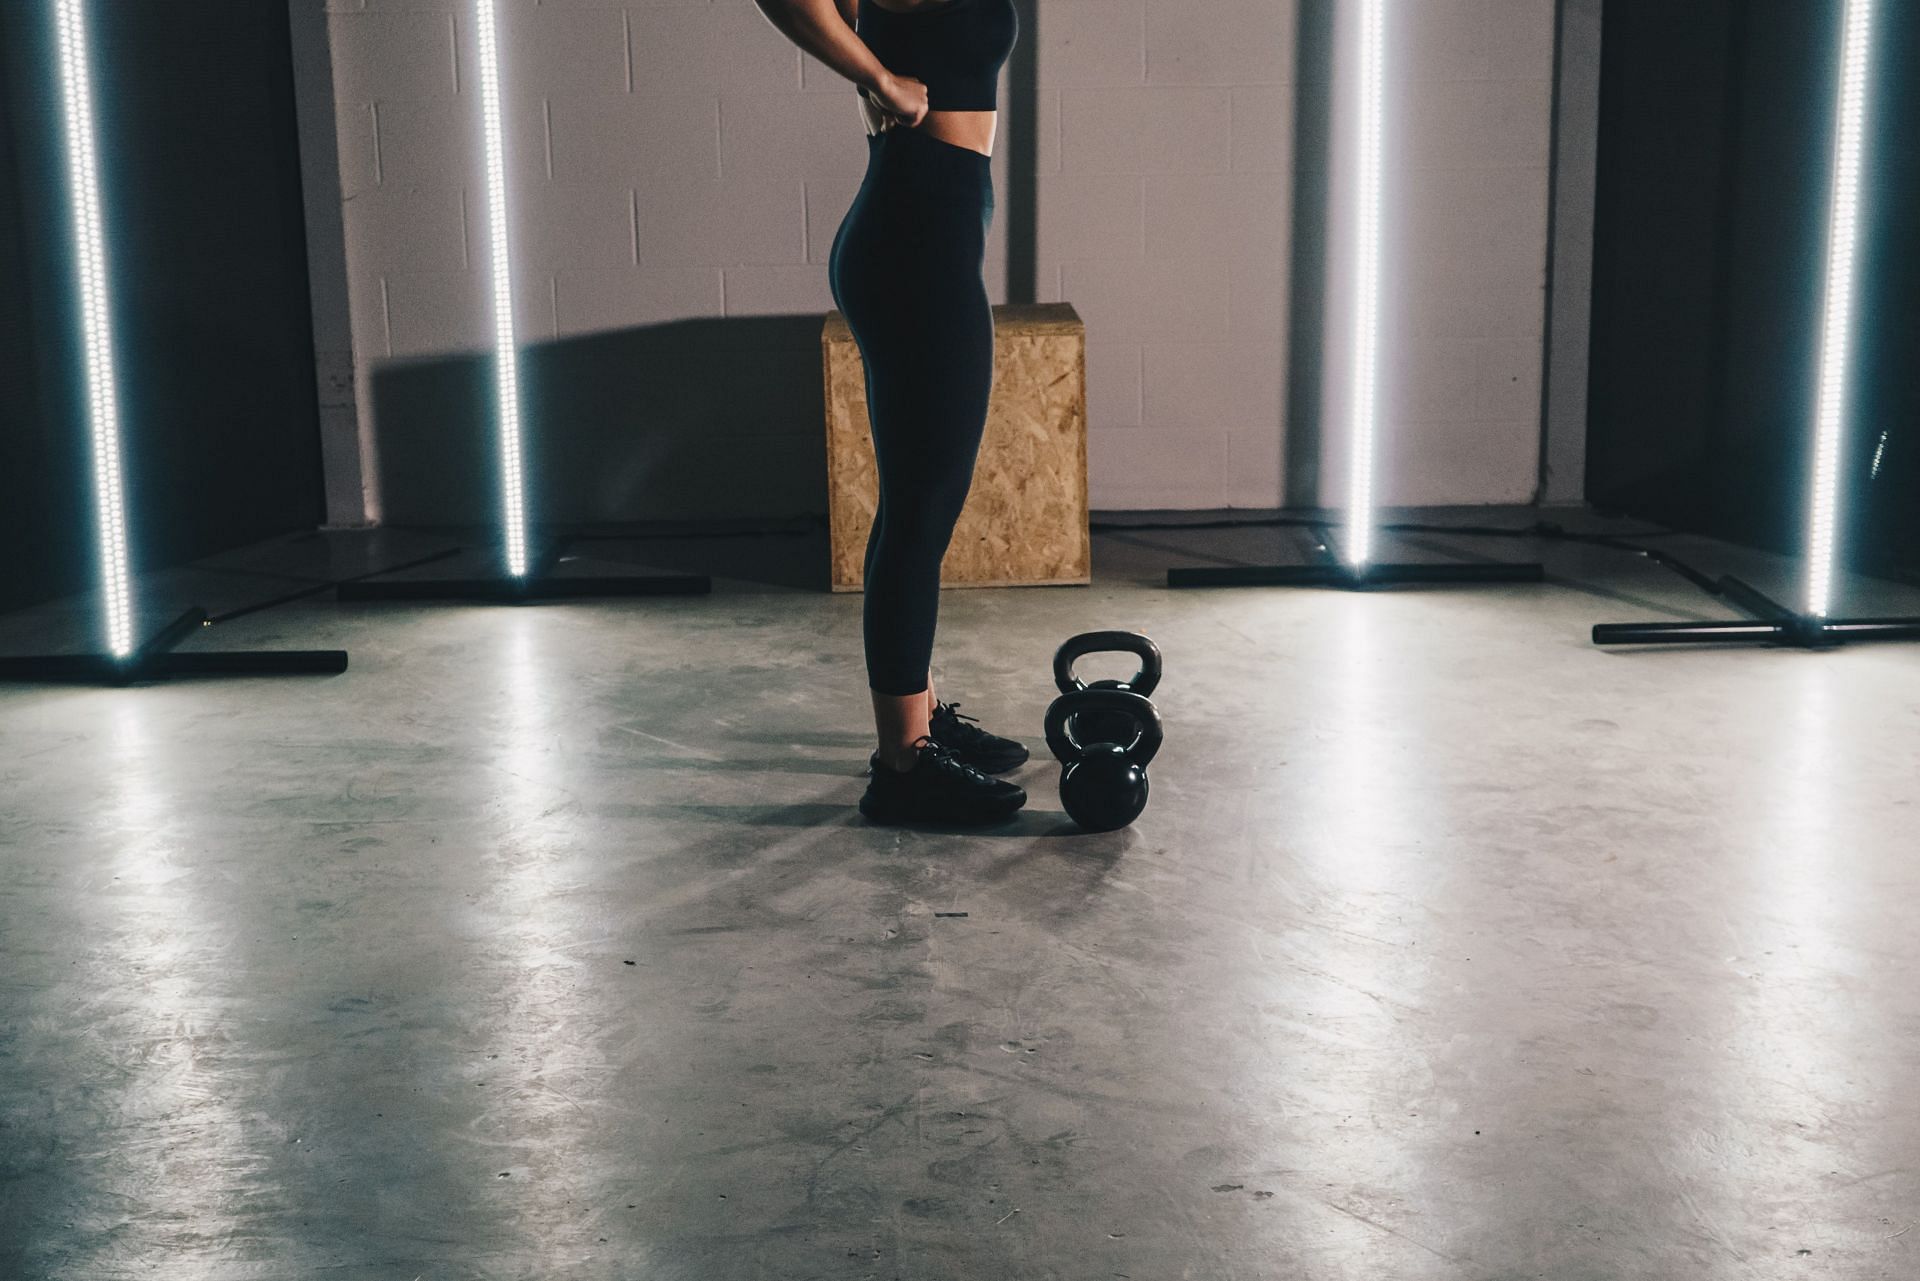 Plie squats are a different kind of traditional squat. (Photo by Ambitious Creative Co. - Rick Barrett on Unsplash)